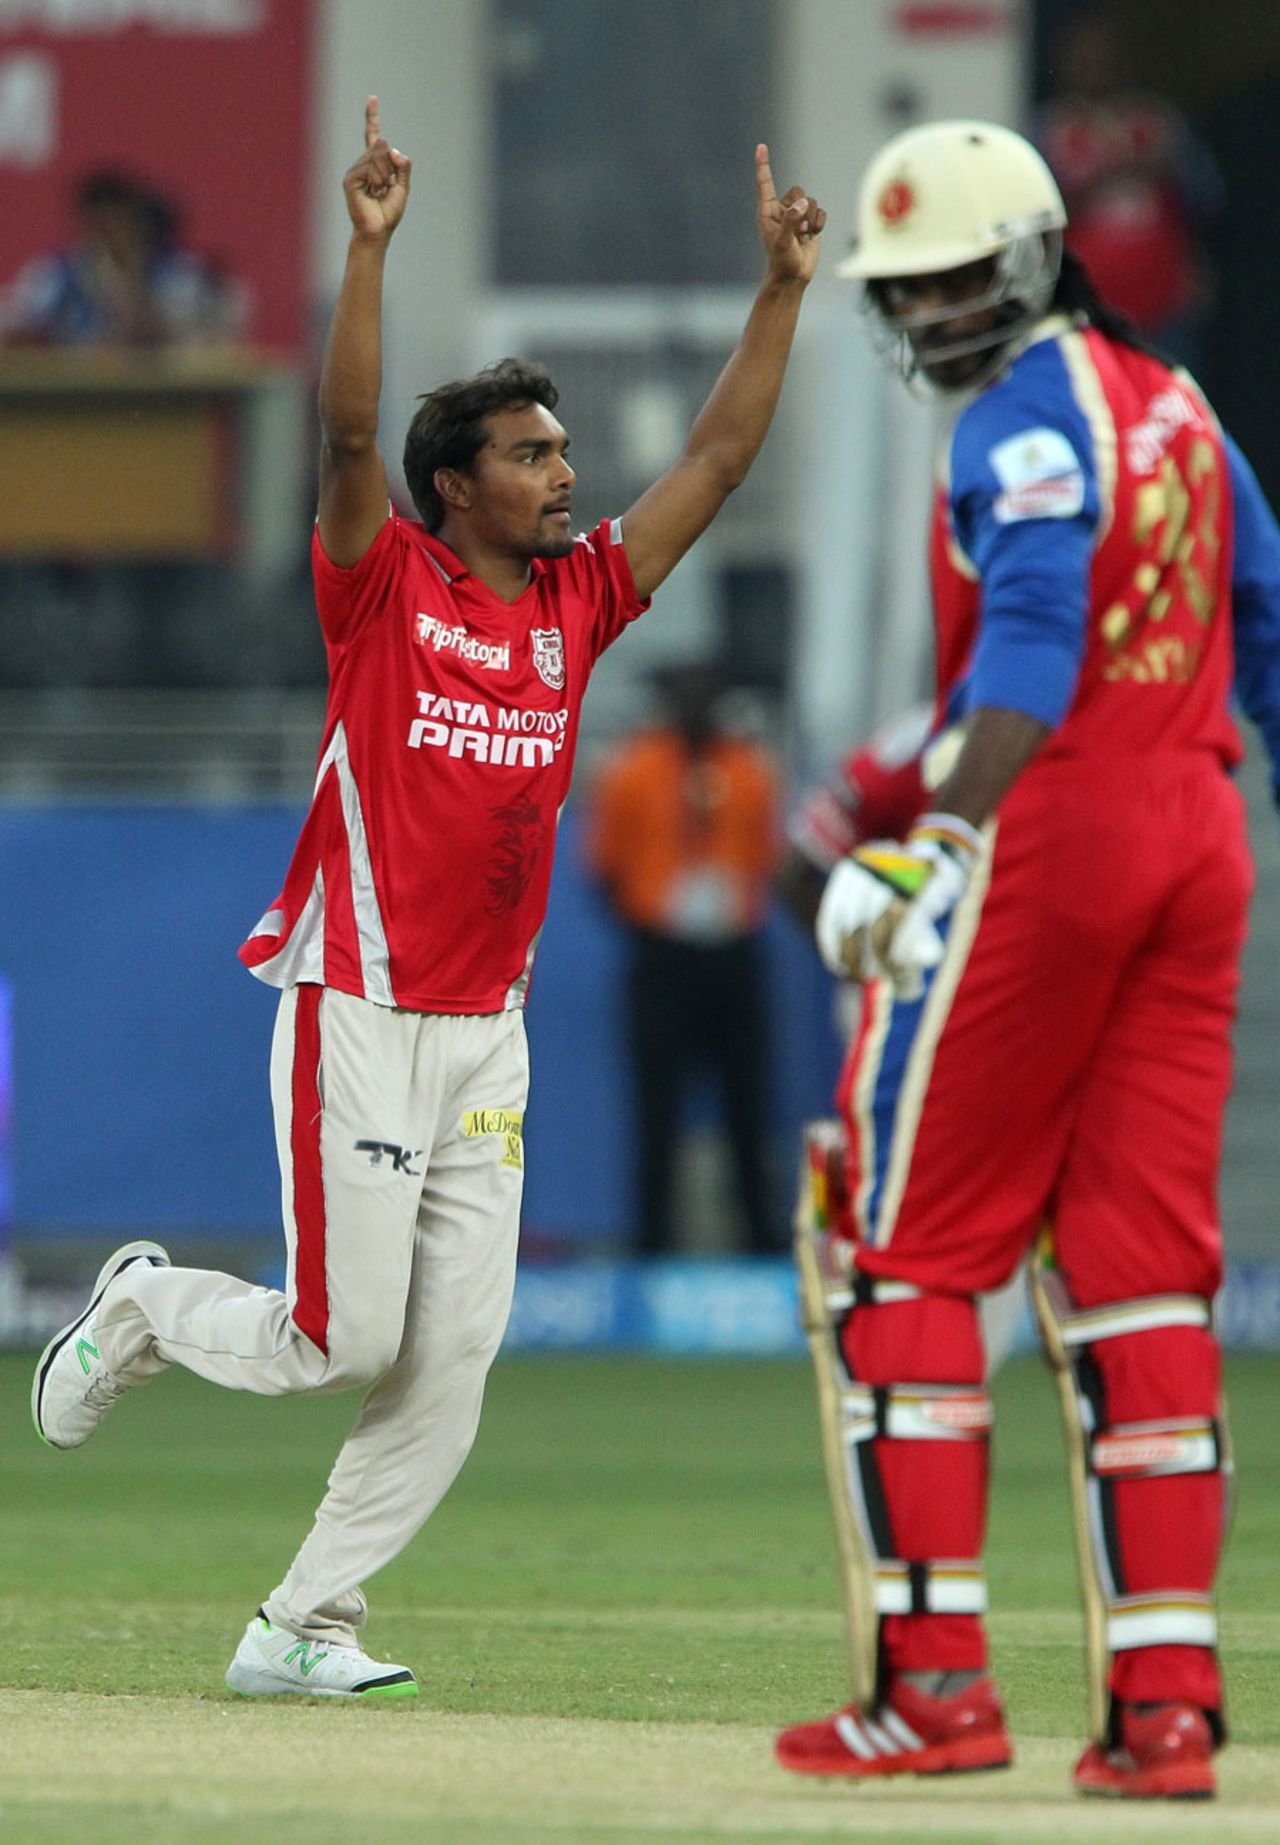 Sandeep Sharma dismissed Chris Gayle in the second over of the innings, Kings XI Punjab v Royal Challengers Bangalore, IPL 2014, Dubai, April 28, 2014